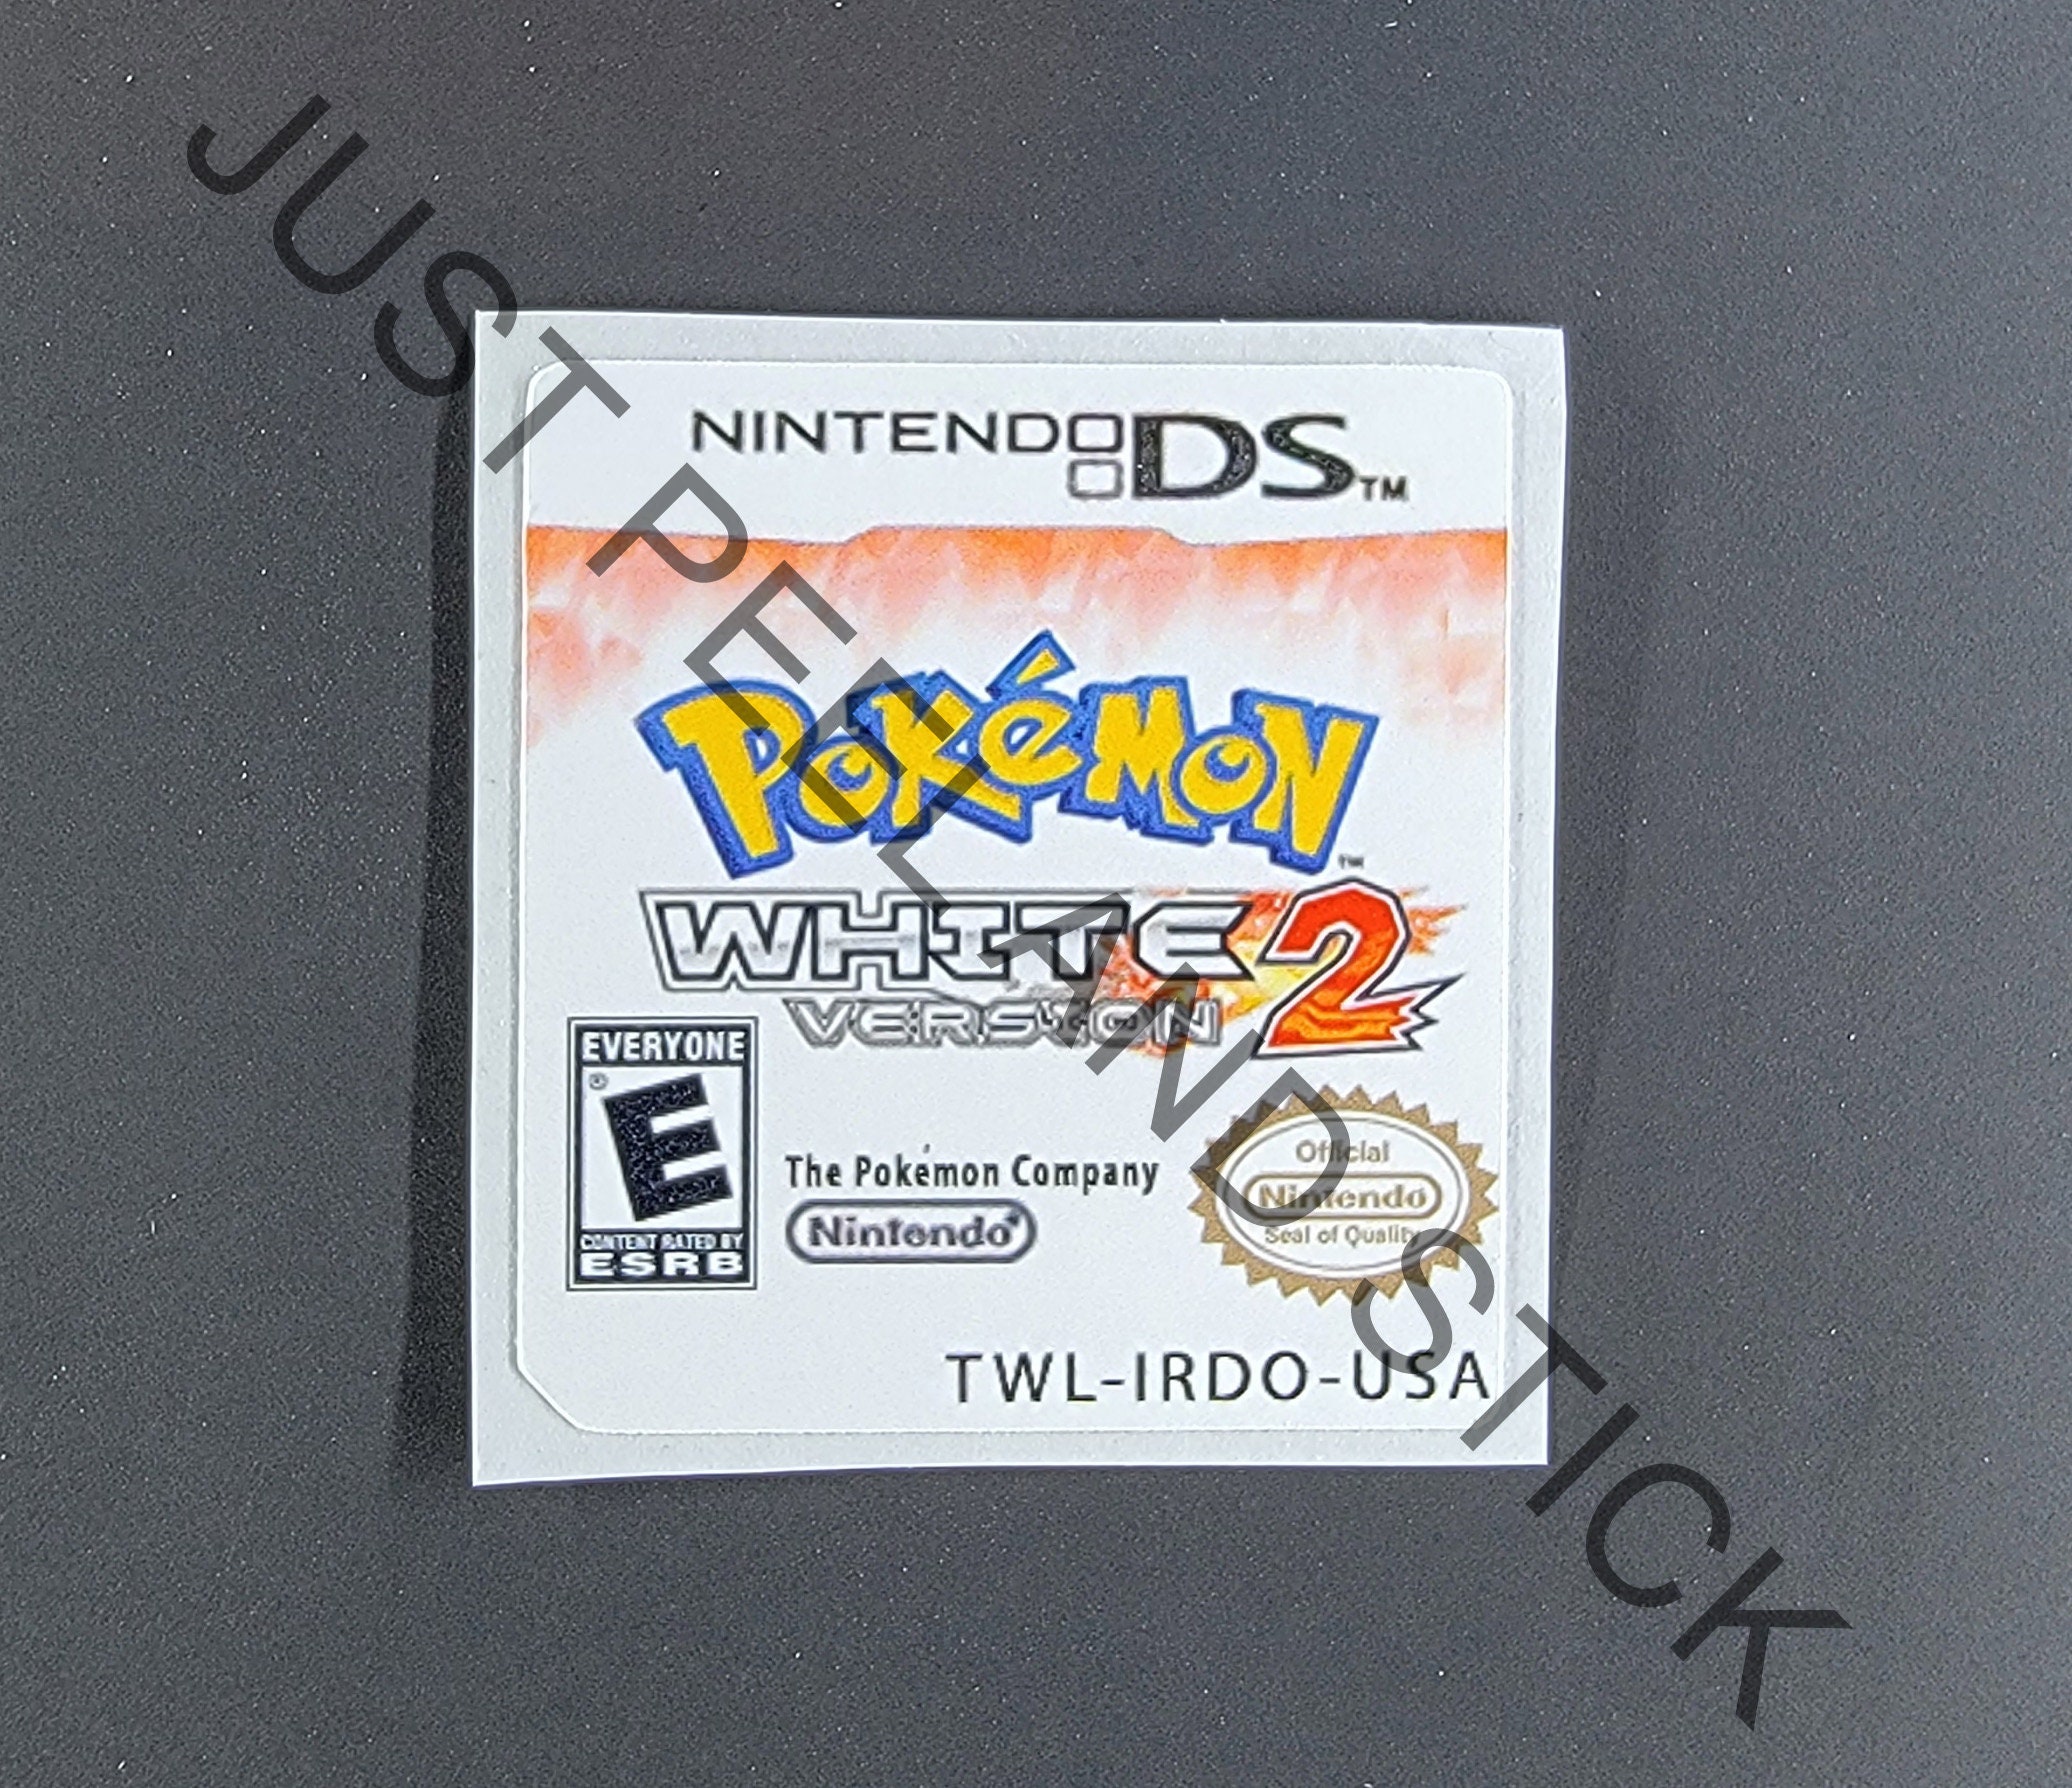 Nintendo DS Pokemon 2 Version Glossy Replacement Label - Etsy